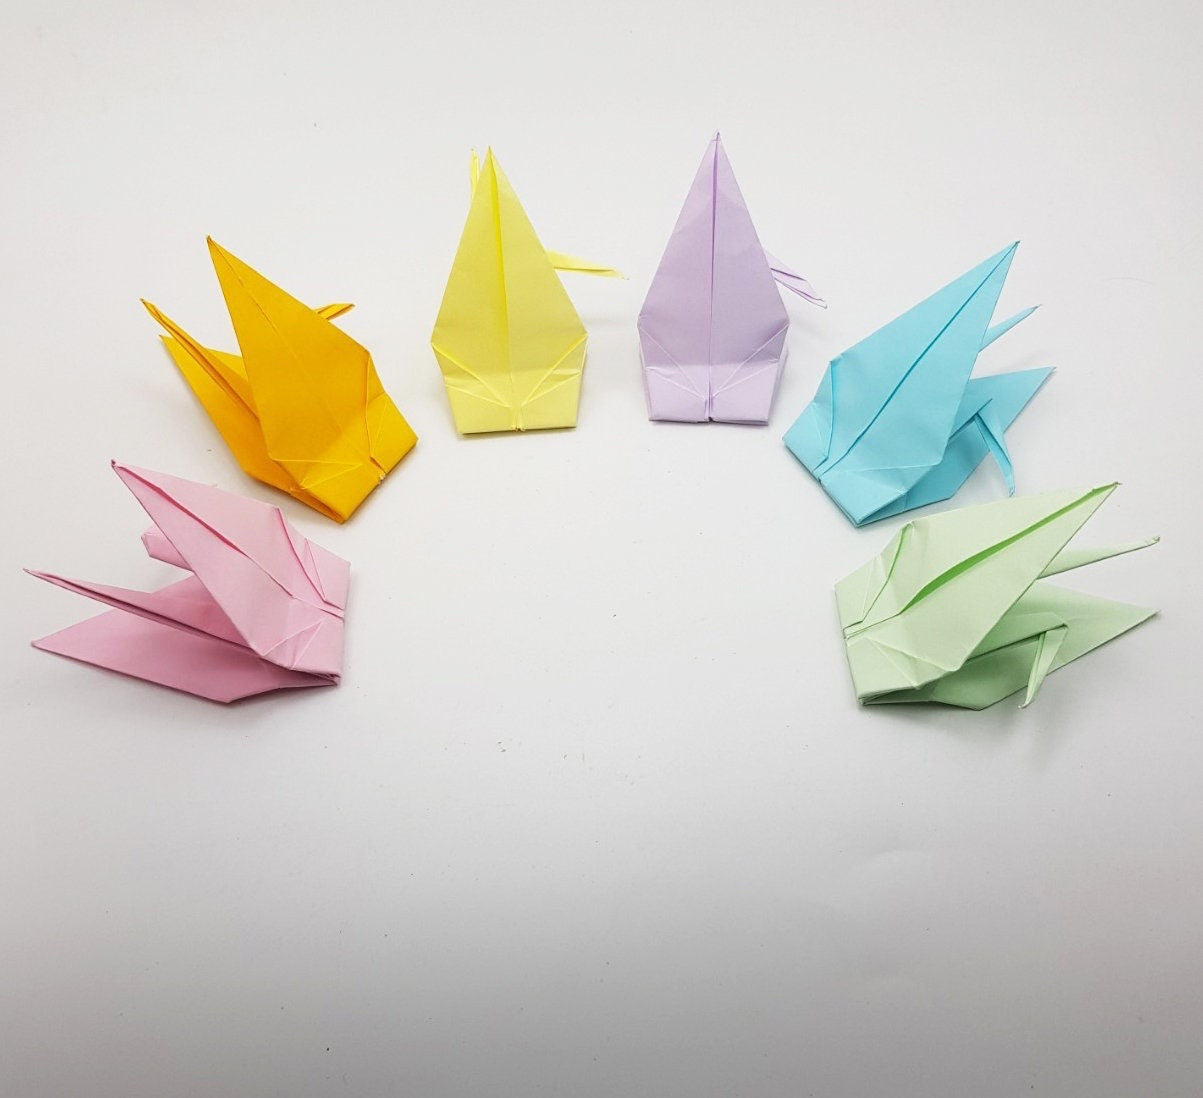 1000 Origami Paper Cranes Mixed color Sweet color Large 6 inches Bird Origami Crane 15 cm 6 inches for Japanese Wedding gift